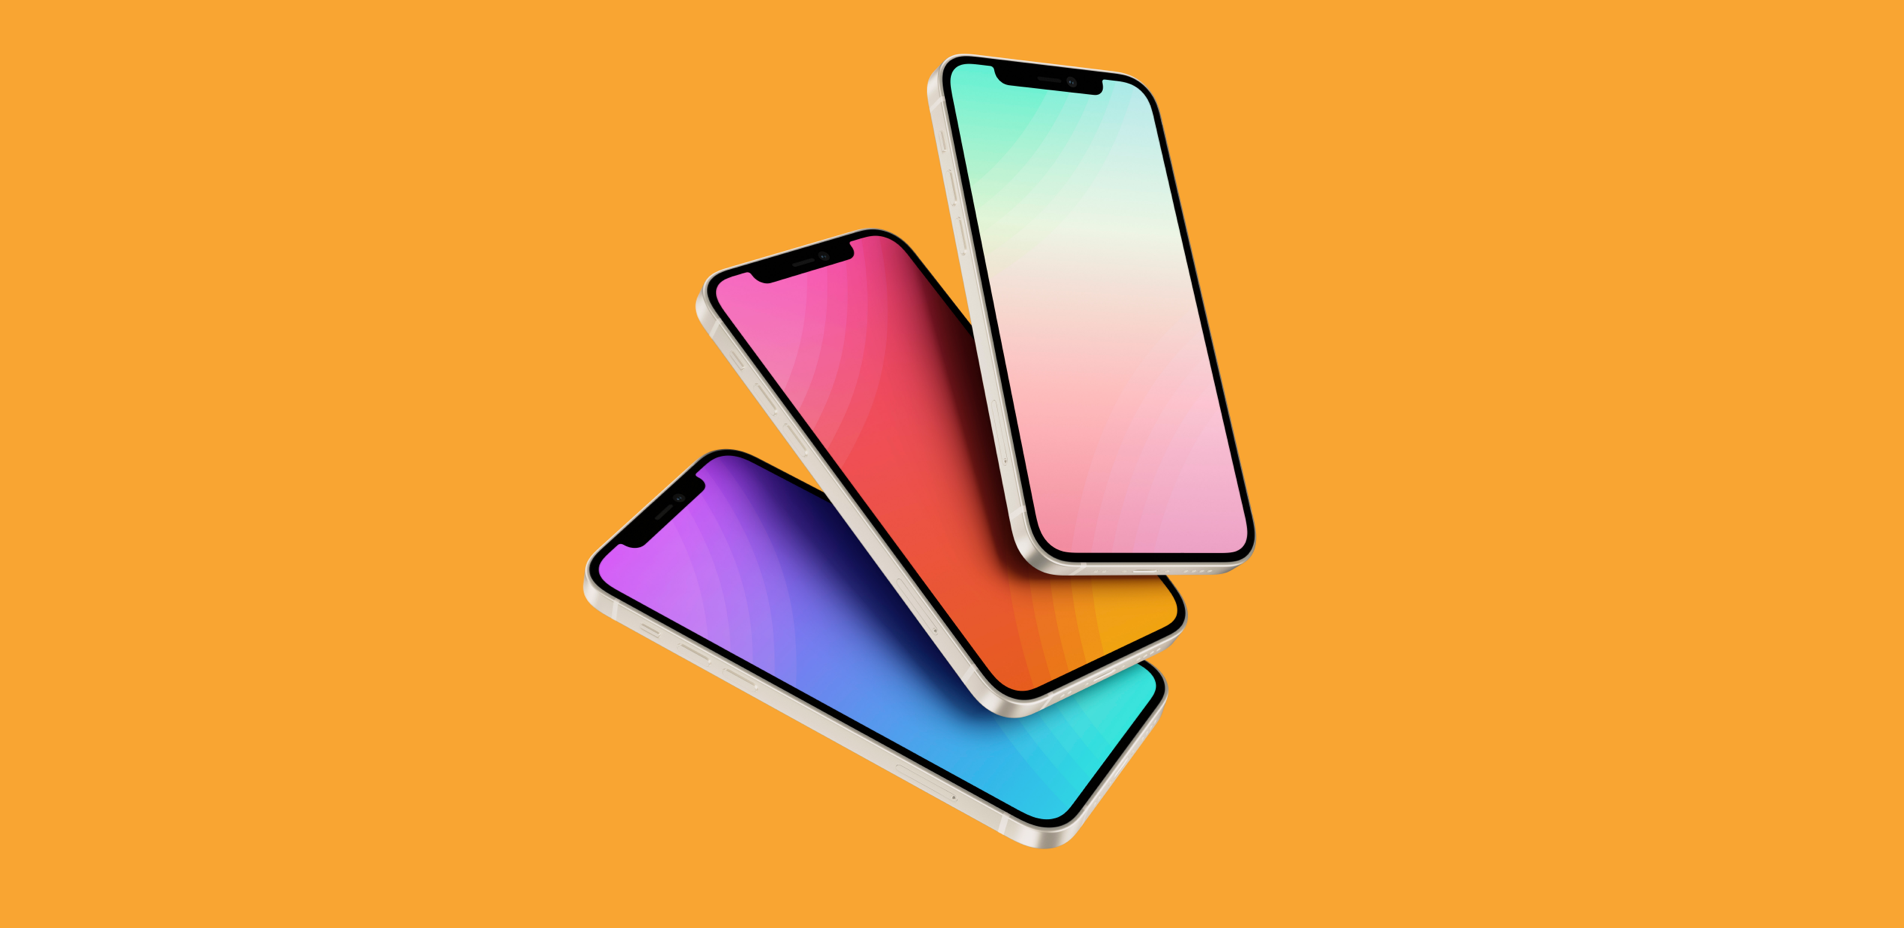 Introducing Vibes, a Premium Wallpaper Pack for the Summer